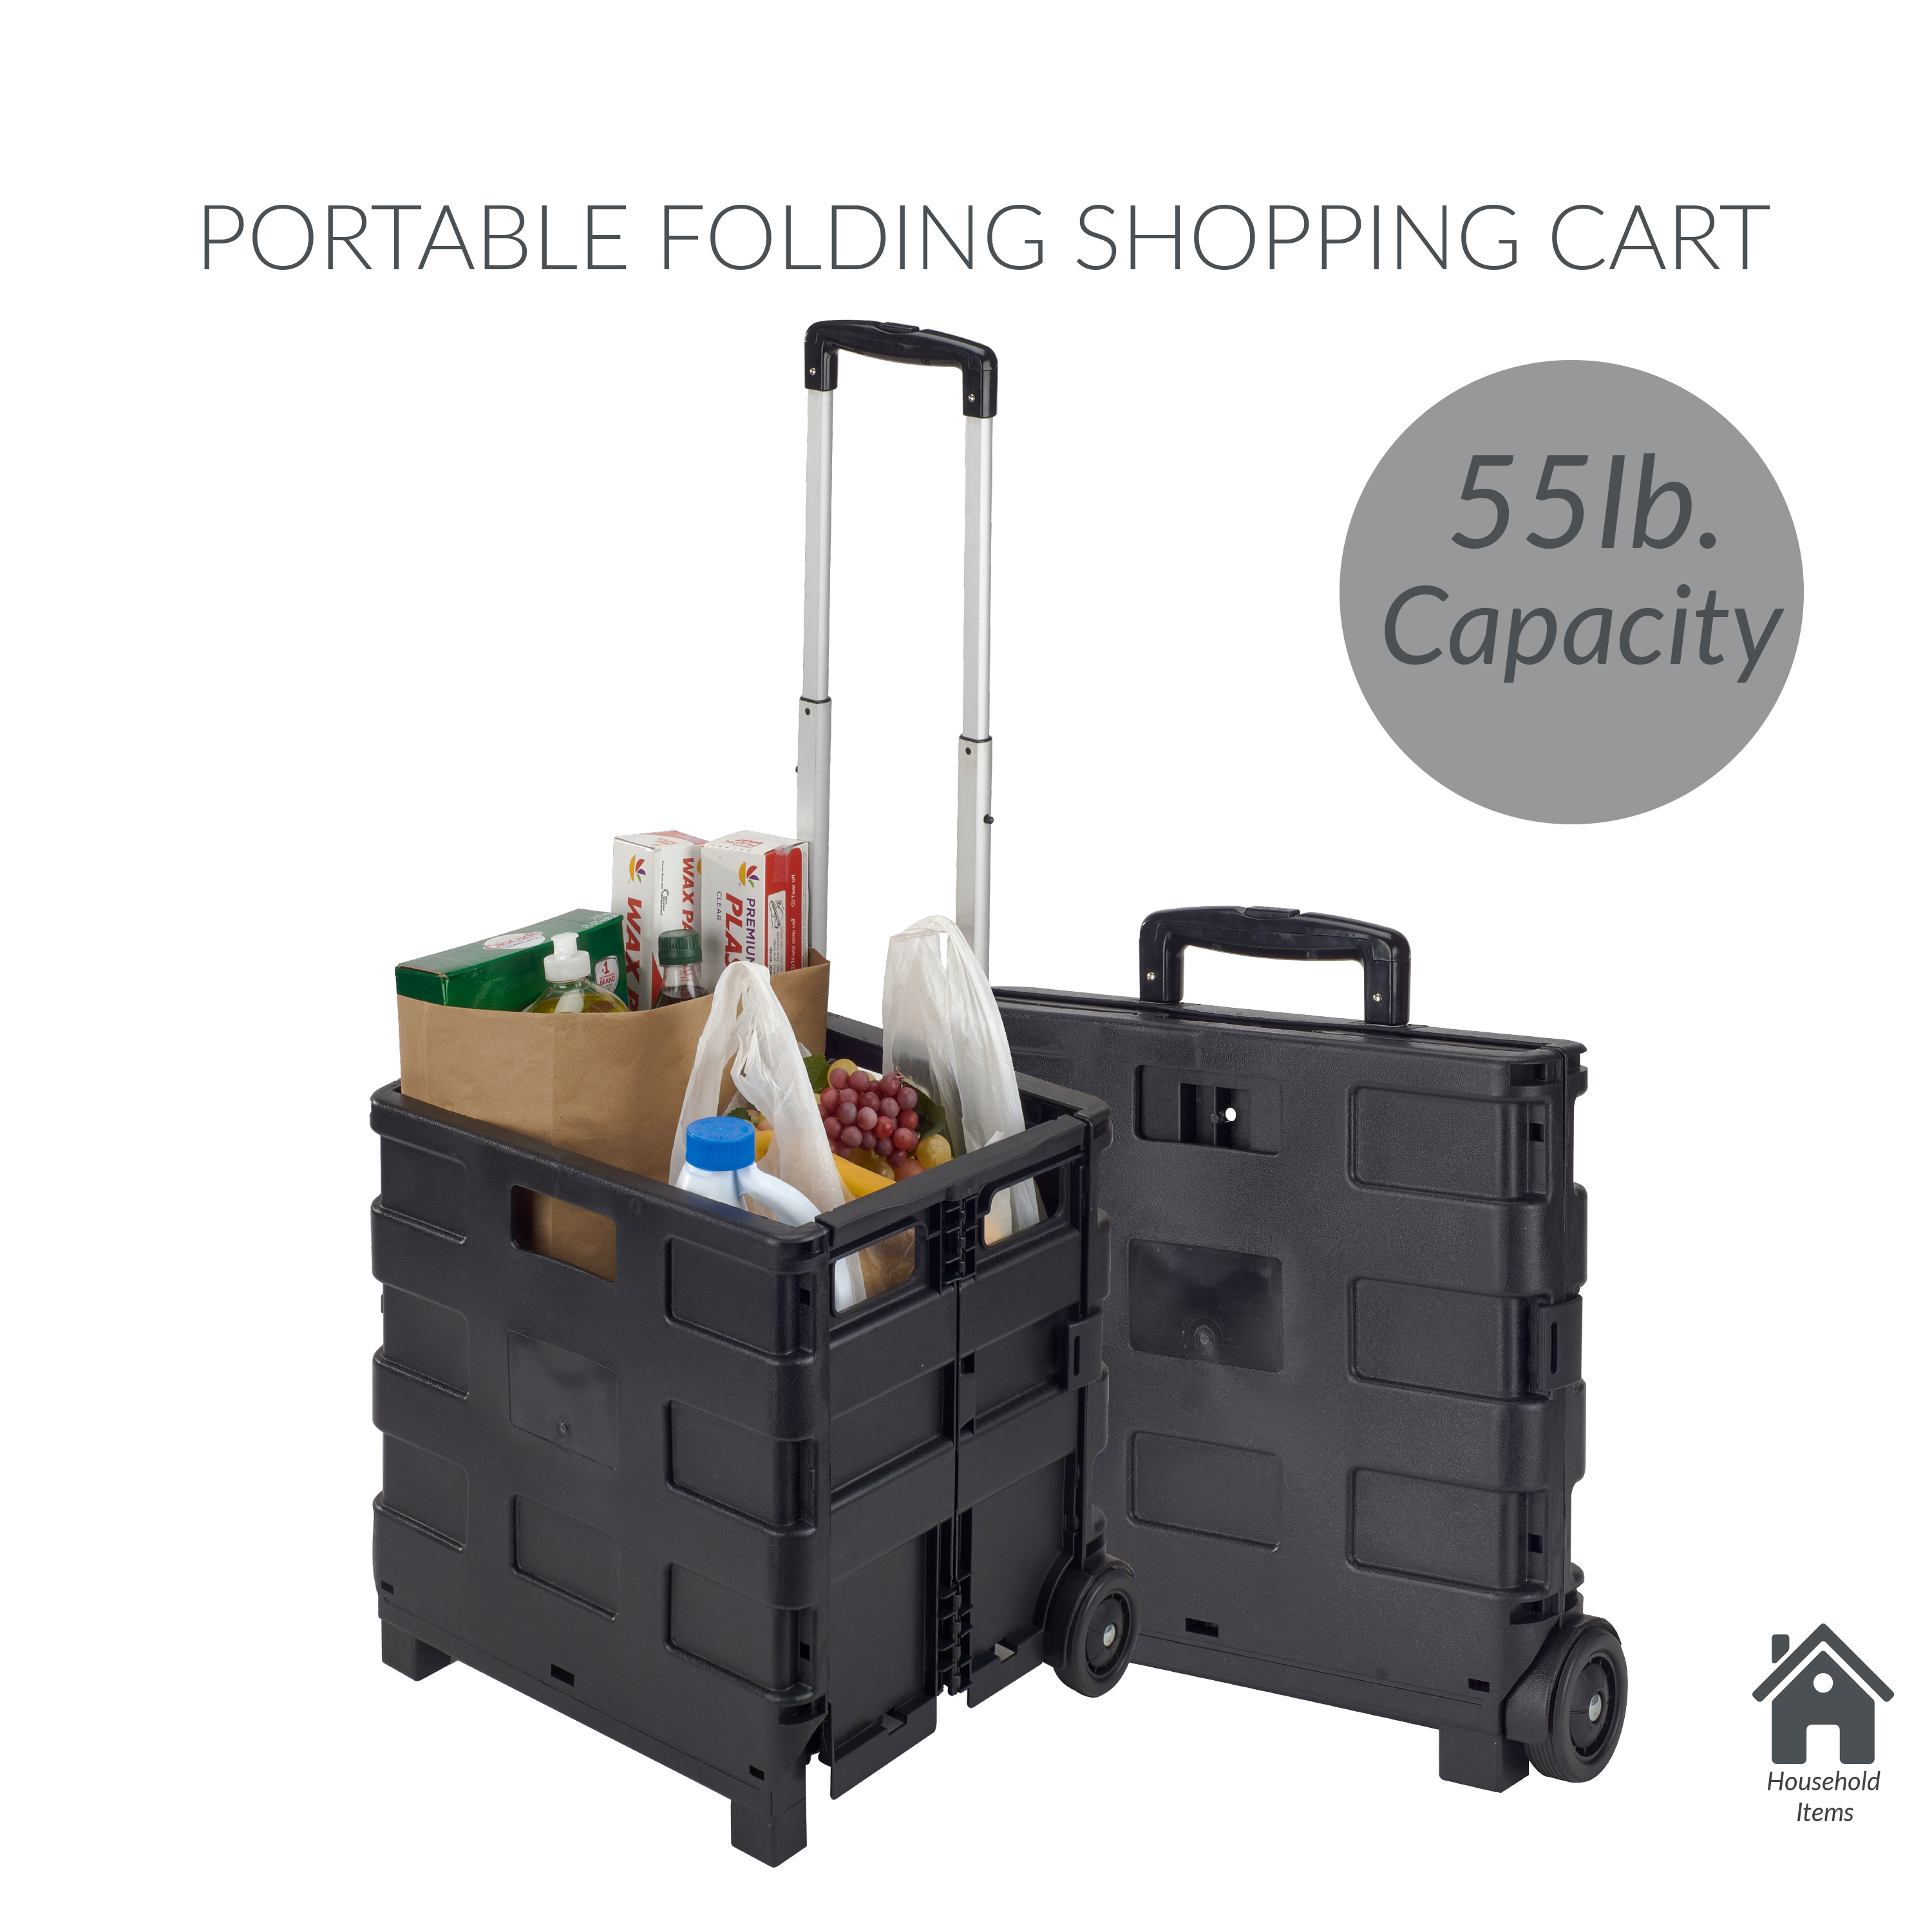 Simplify Tote Bin Collapsible Utility Cart, Plastic, Black, 15" x 13" x 14.2" - image 3 of 9